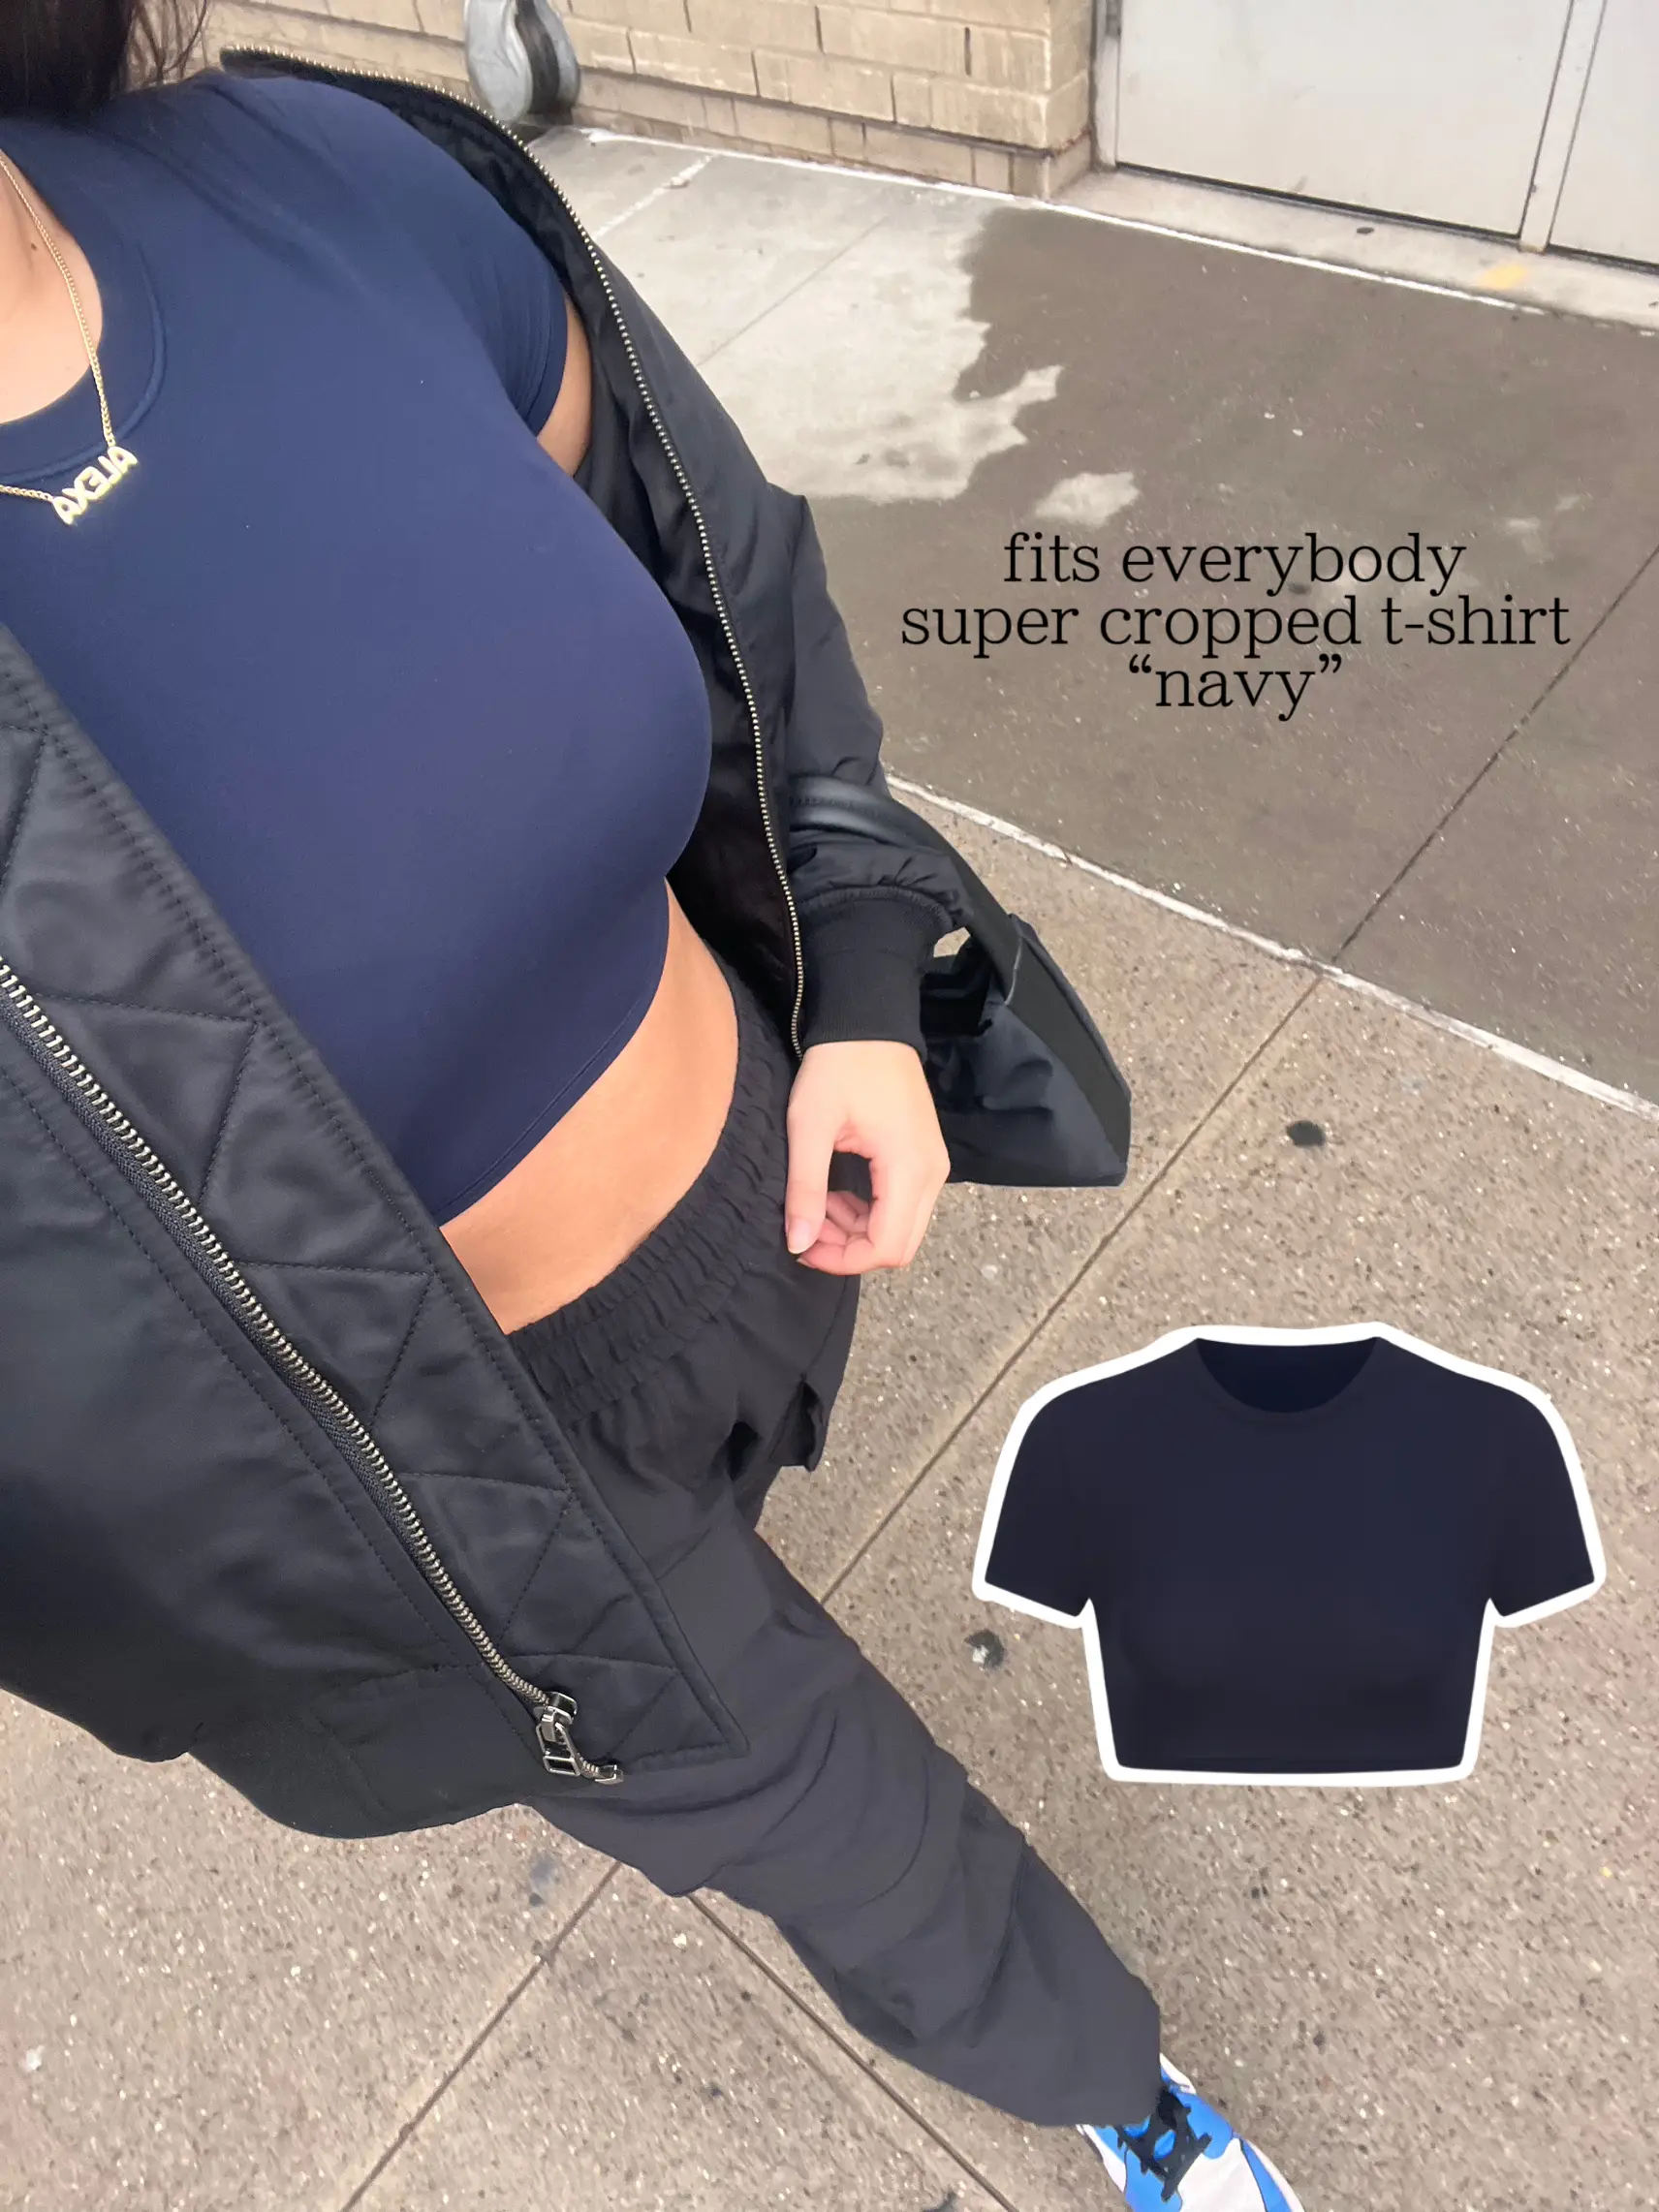 SKIMS: Black Fits Everybody Super Cropped T-Shirt